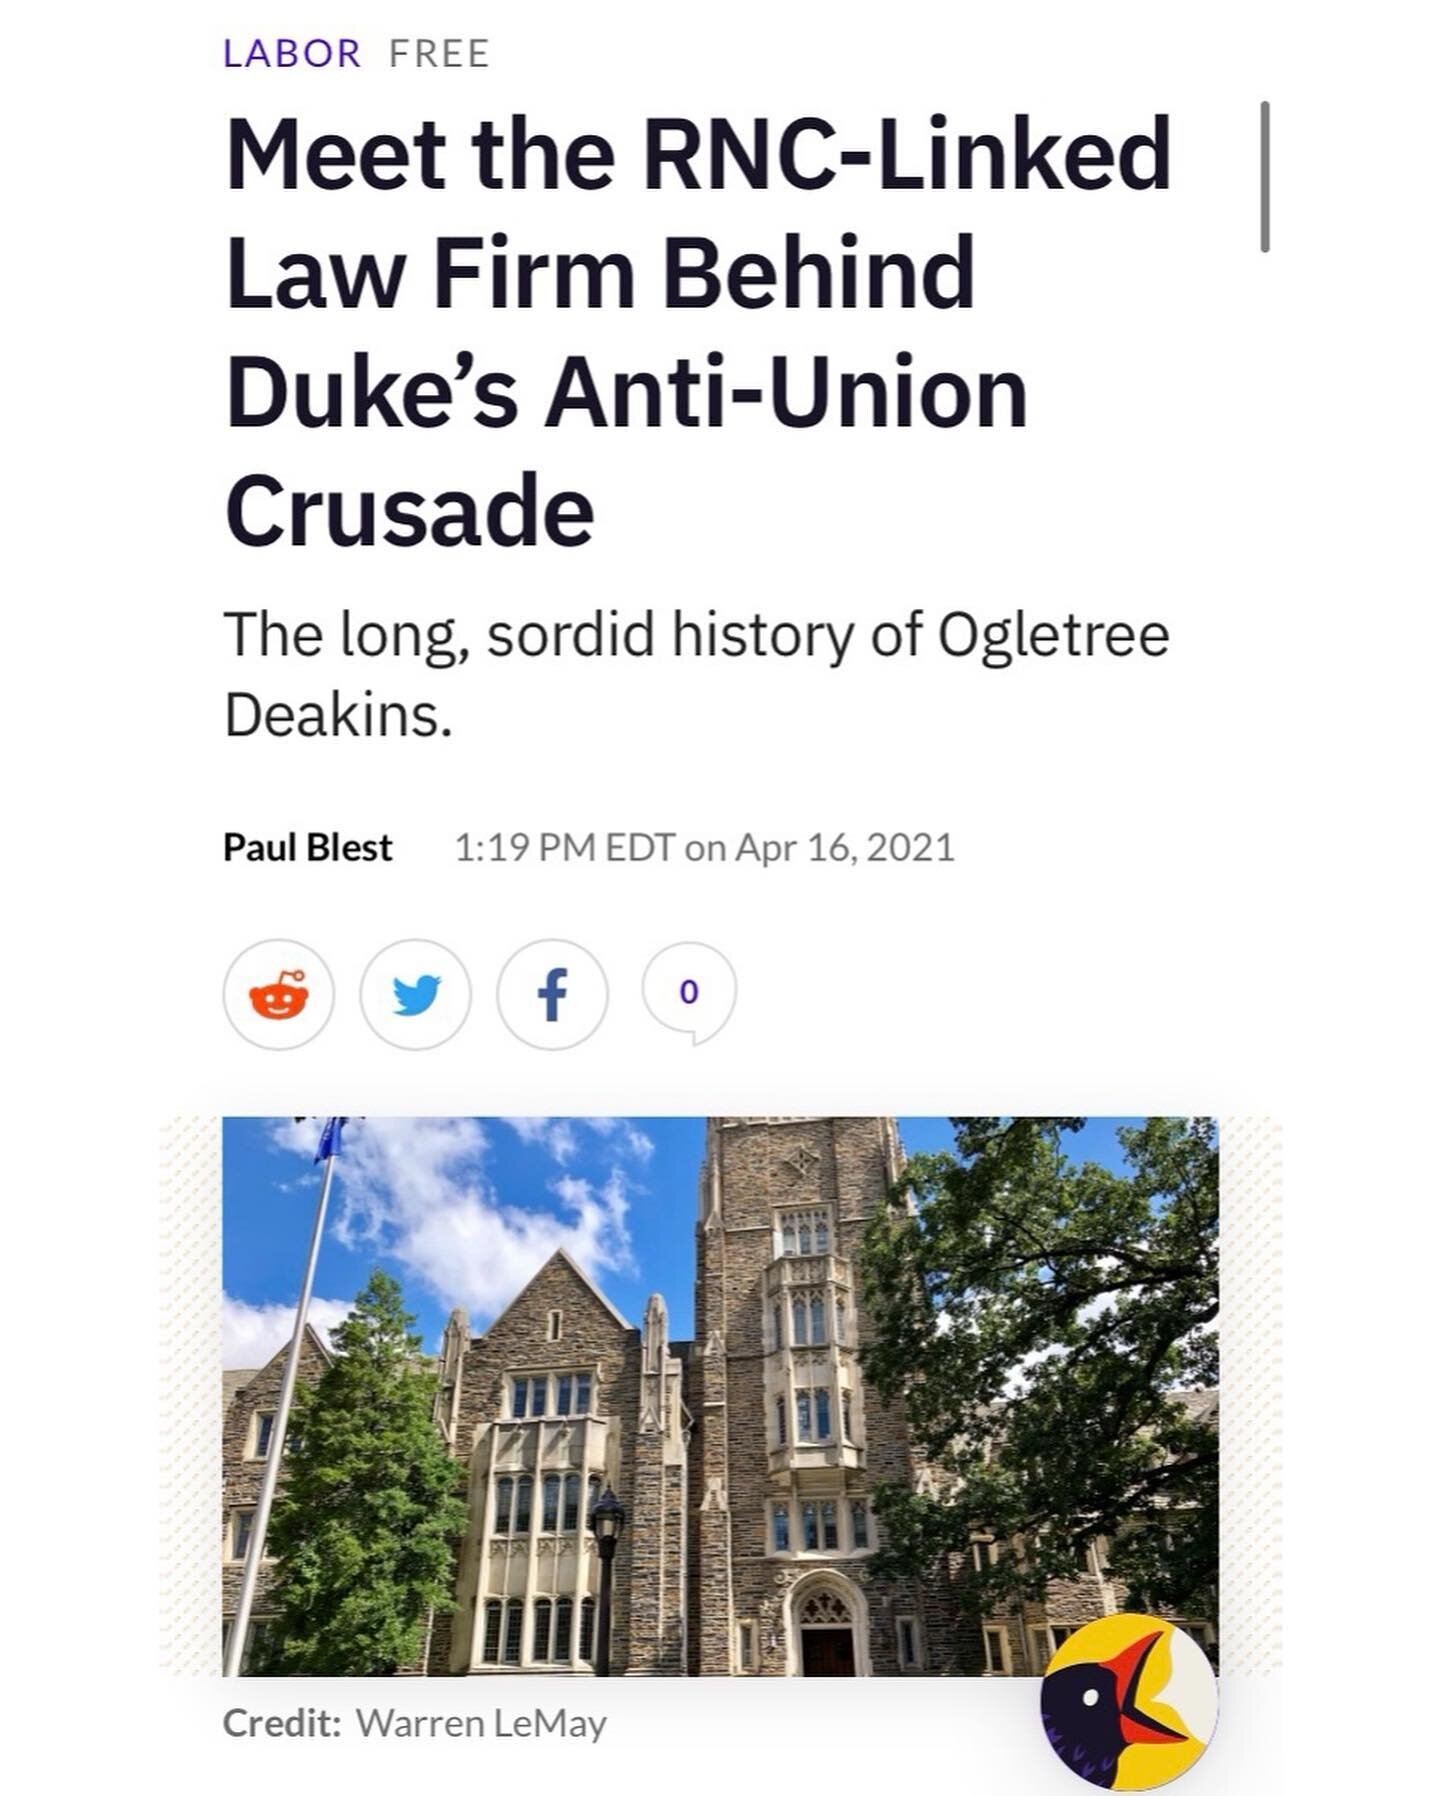 Now on @discourseblog: read about how @dukeuniversity has hired a racist, anti-immigrant, anti-worker law firm to bust our organizing. Please amplify our call: We demand that Duke cut ties with Ogletree Deakins immediately. 🚨📢